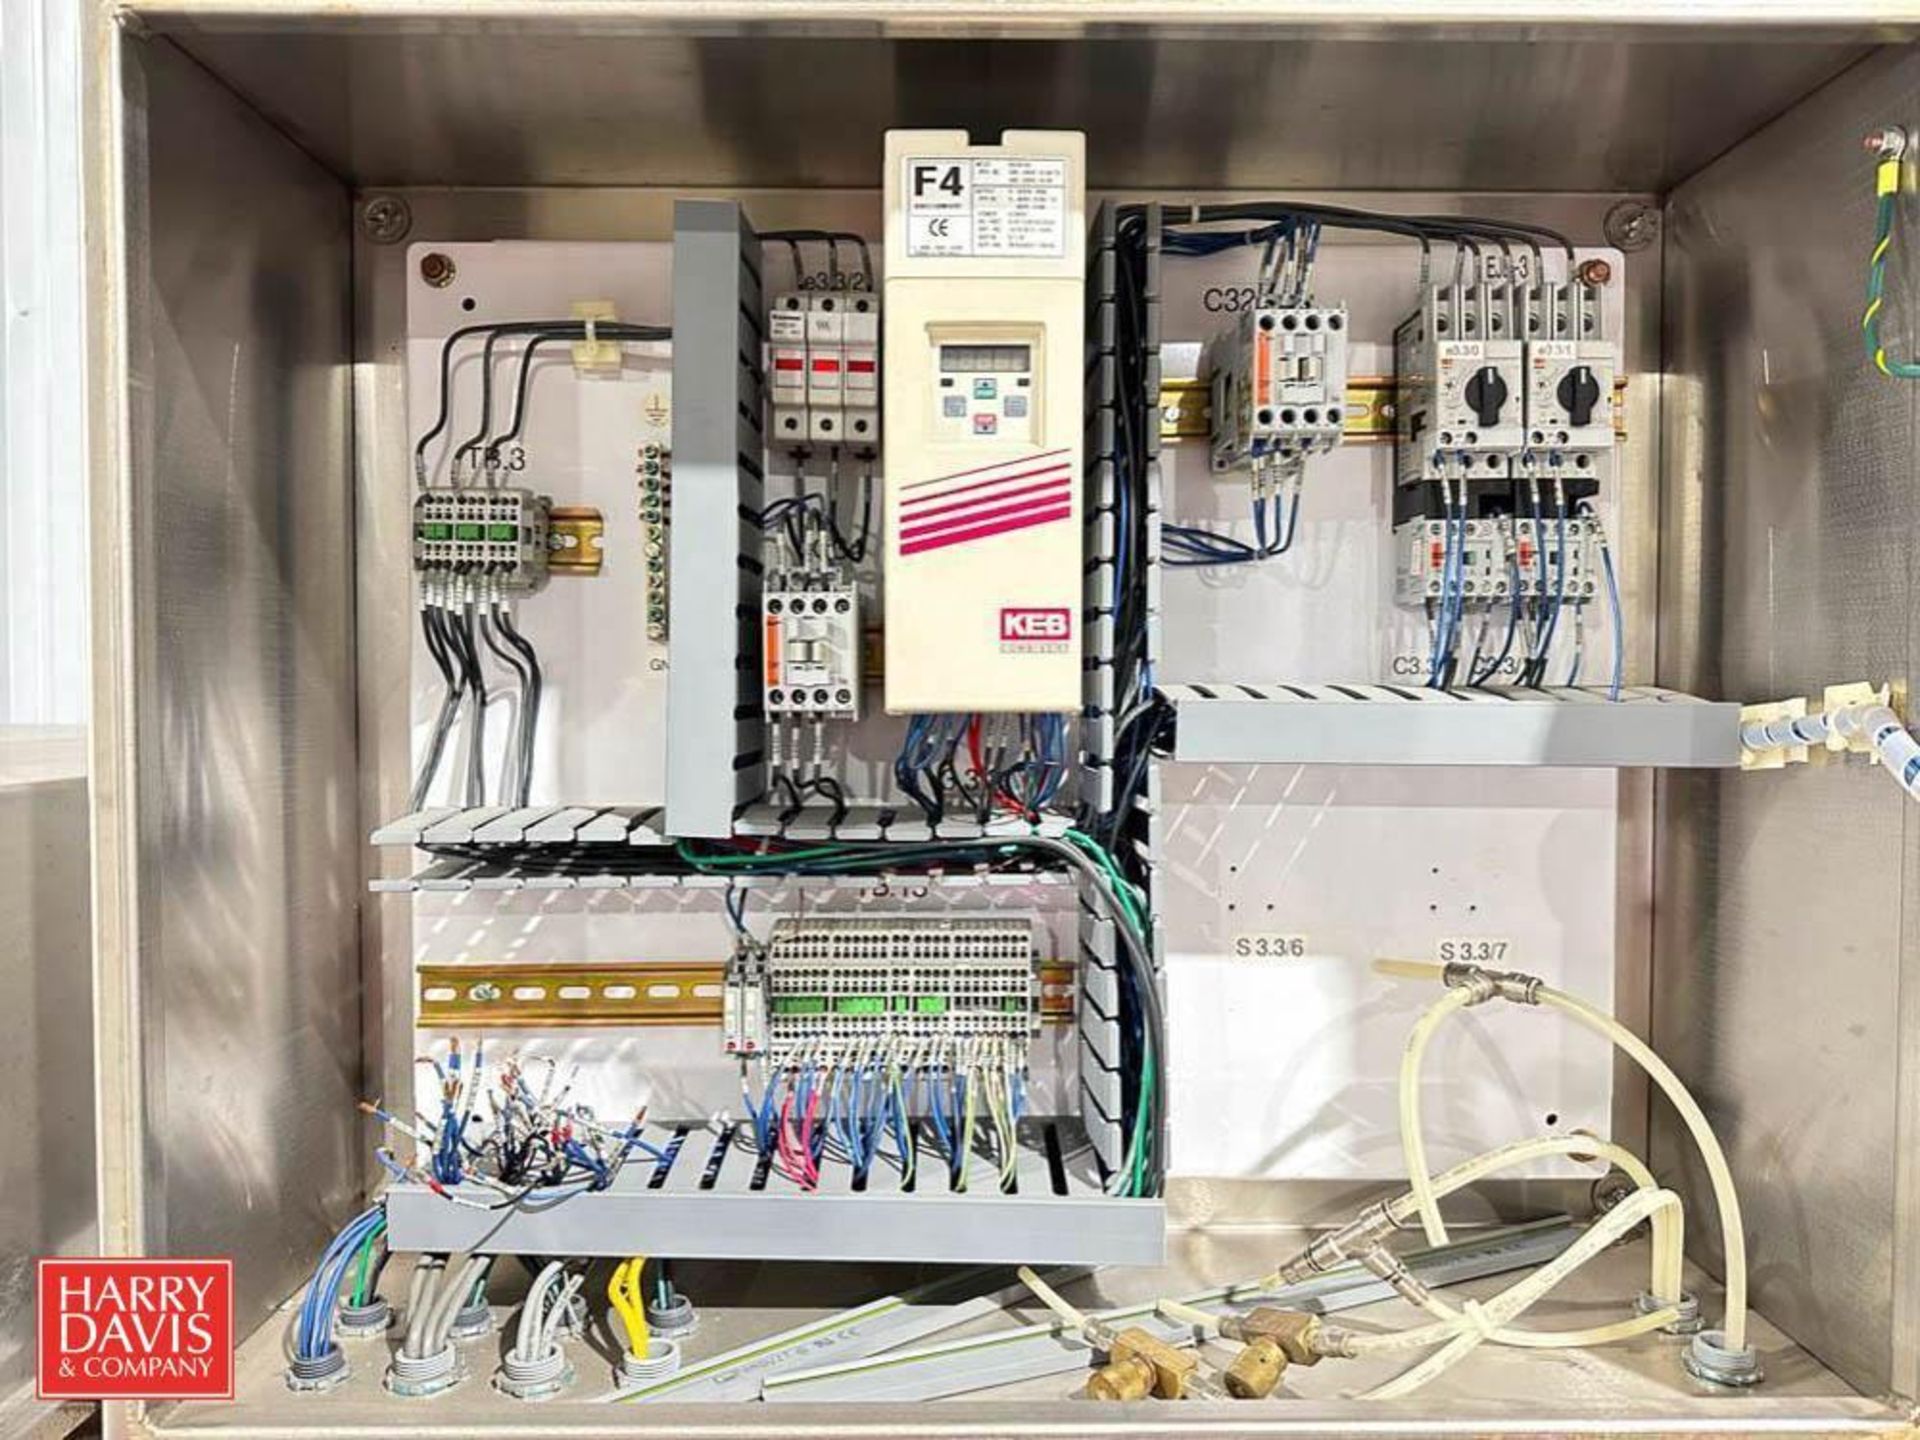 EDL Packer with Kebco 3 HP Variable-Frequency Drive, Contactors and Solenoids - Rigging Fee: $750 - Image 2 of 3